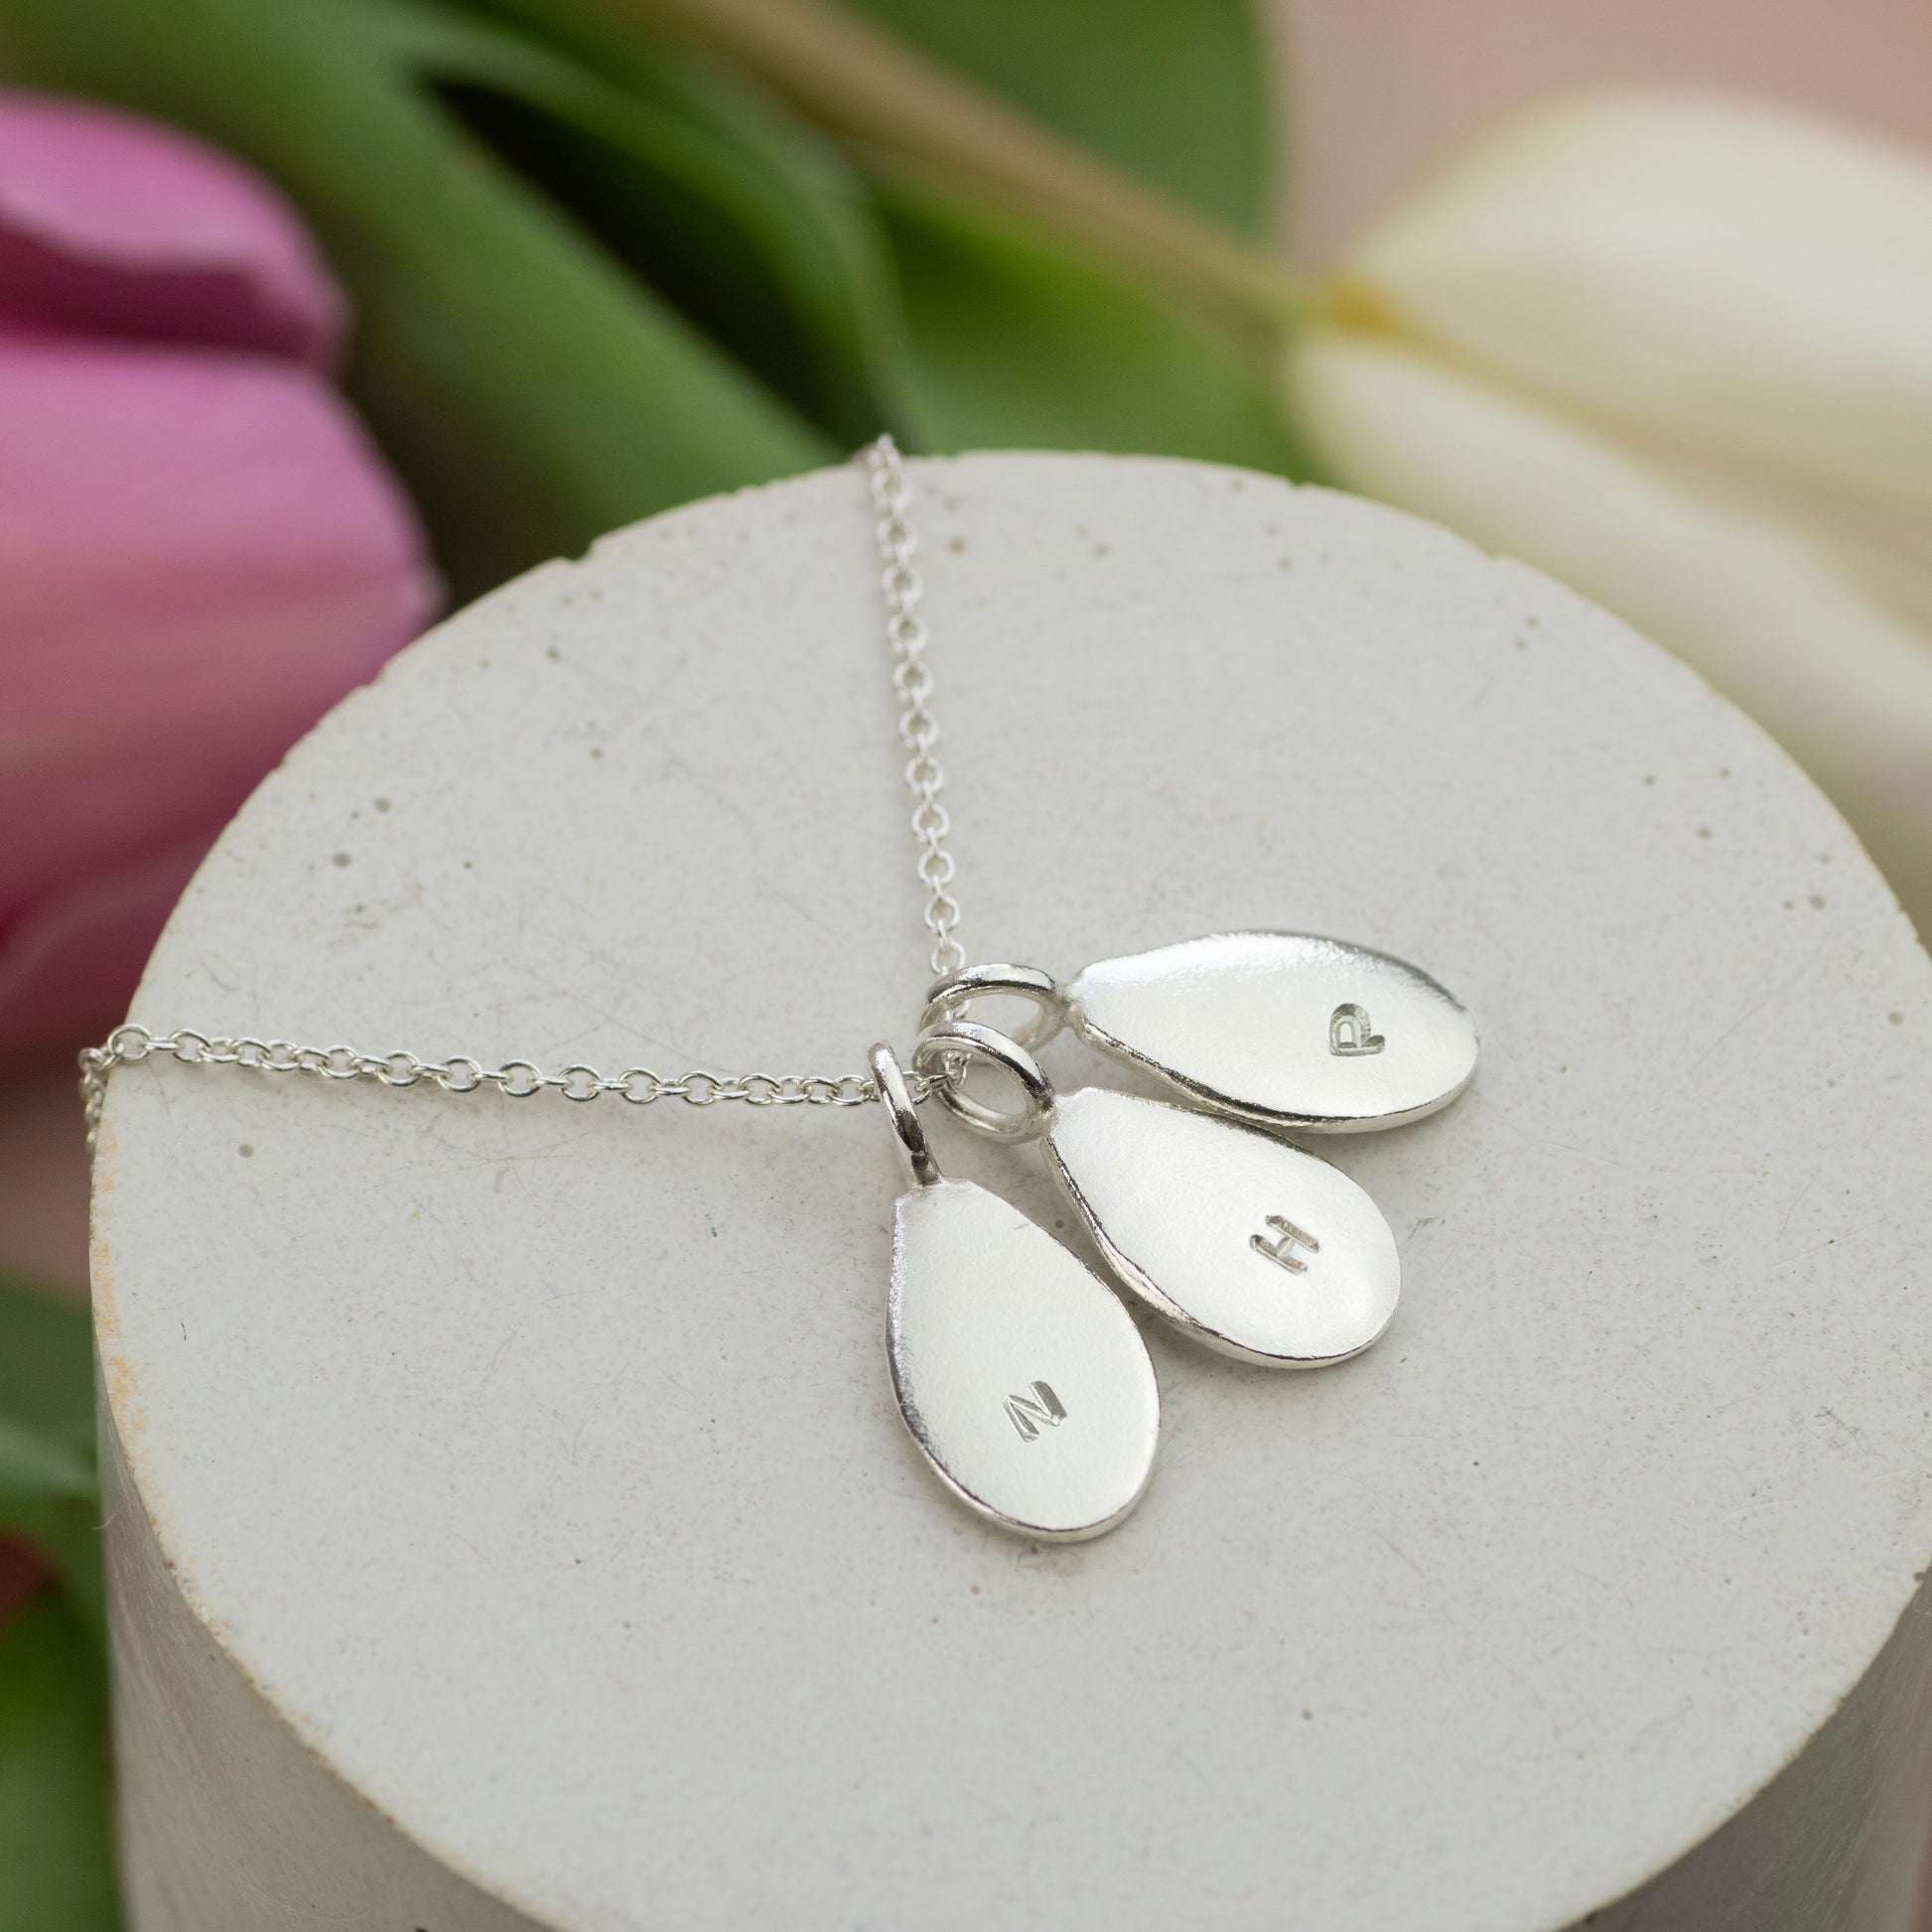 Personalised Family Seed Necklace with Initials - Silver